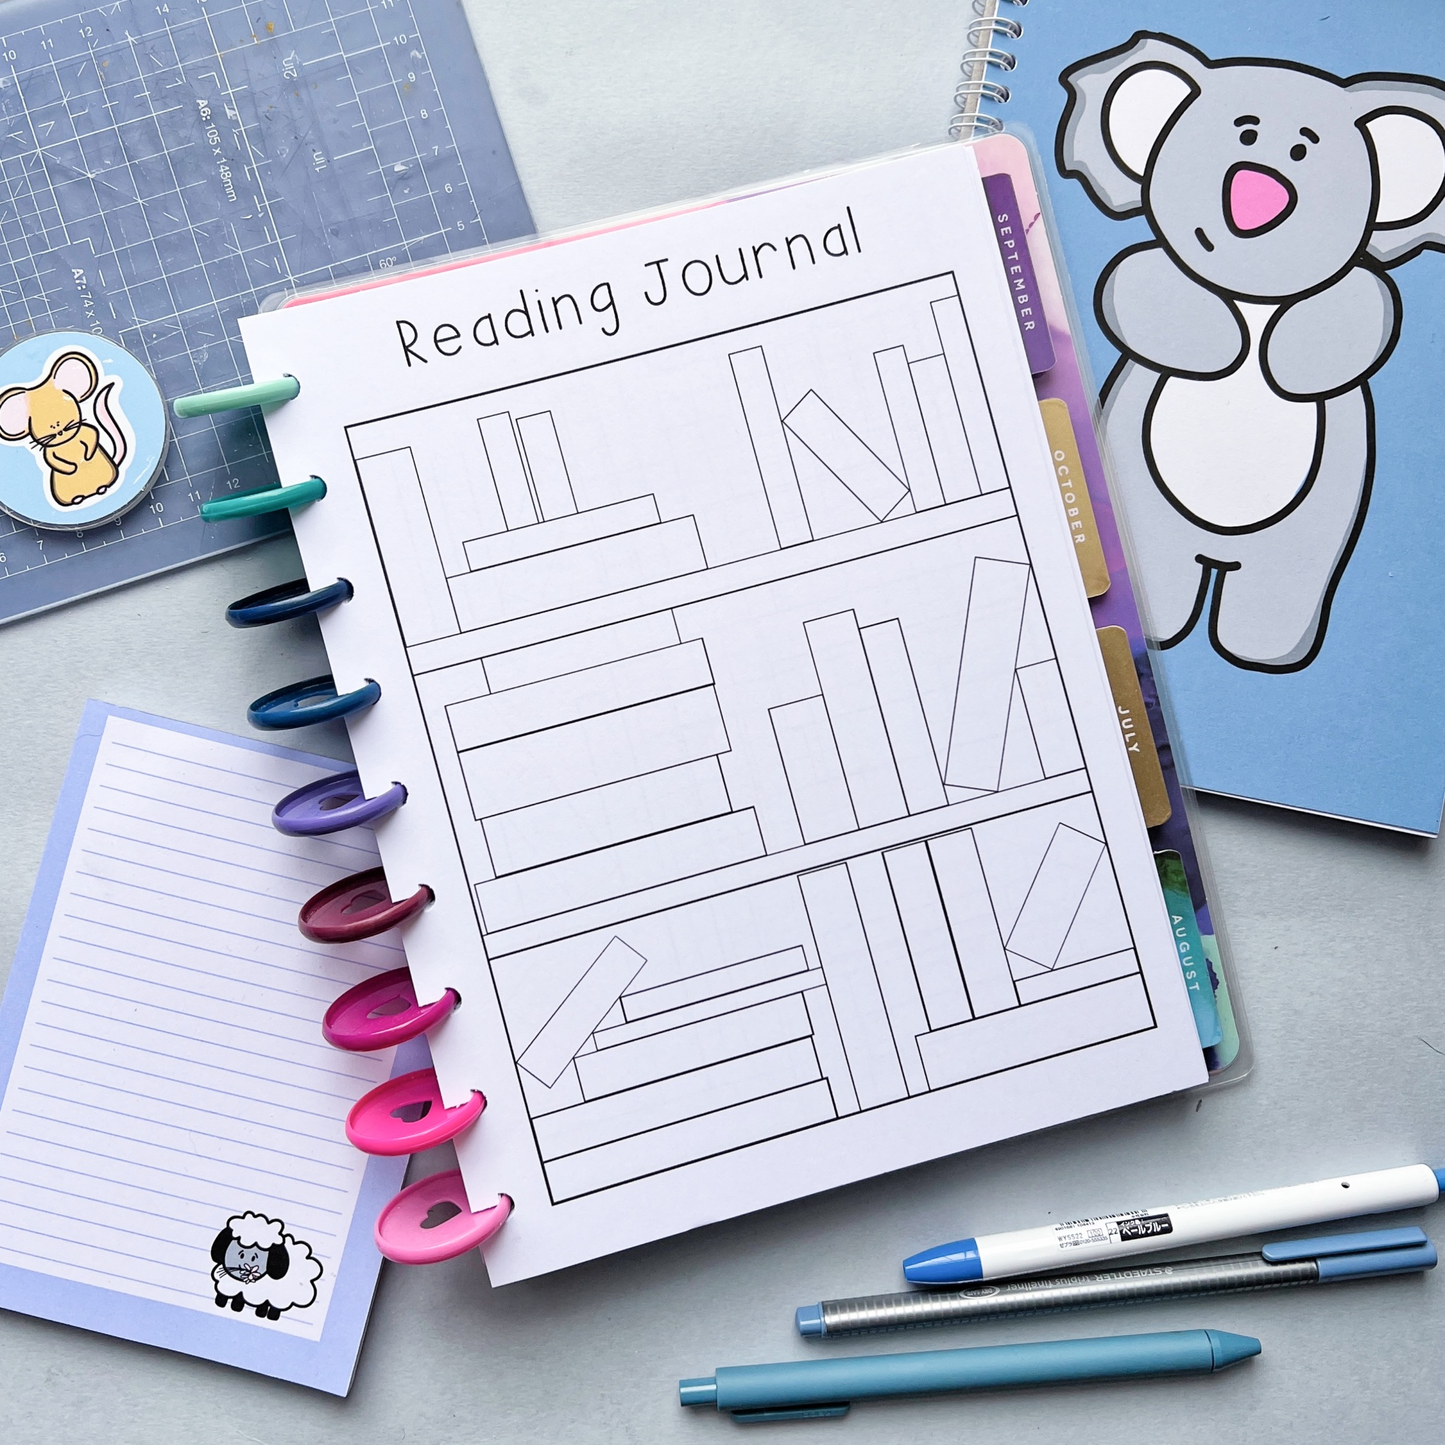 An open binder labeled "Reading Log" is displayed on a white surface. The page shows an outline of bookshelves, perfect for your book tracker. Surrounding the binder are colorful highlighters, a pen, a multicolored pom-pom coaster, and paper flowers.